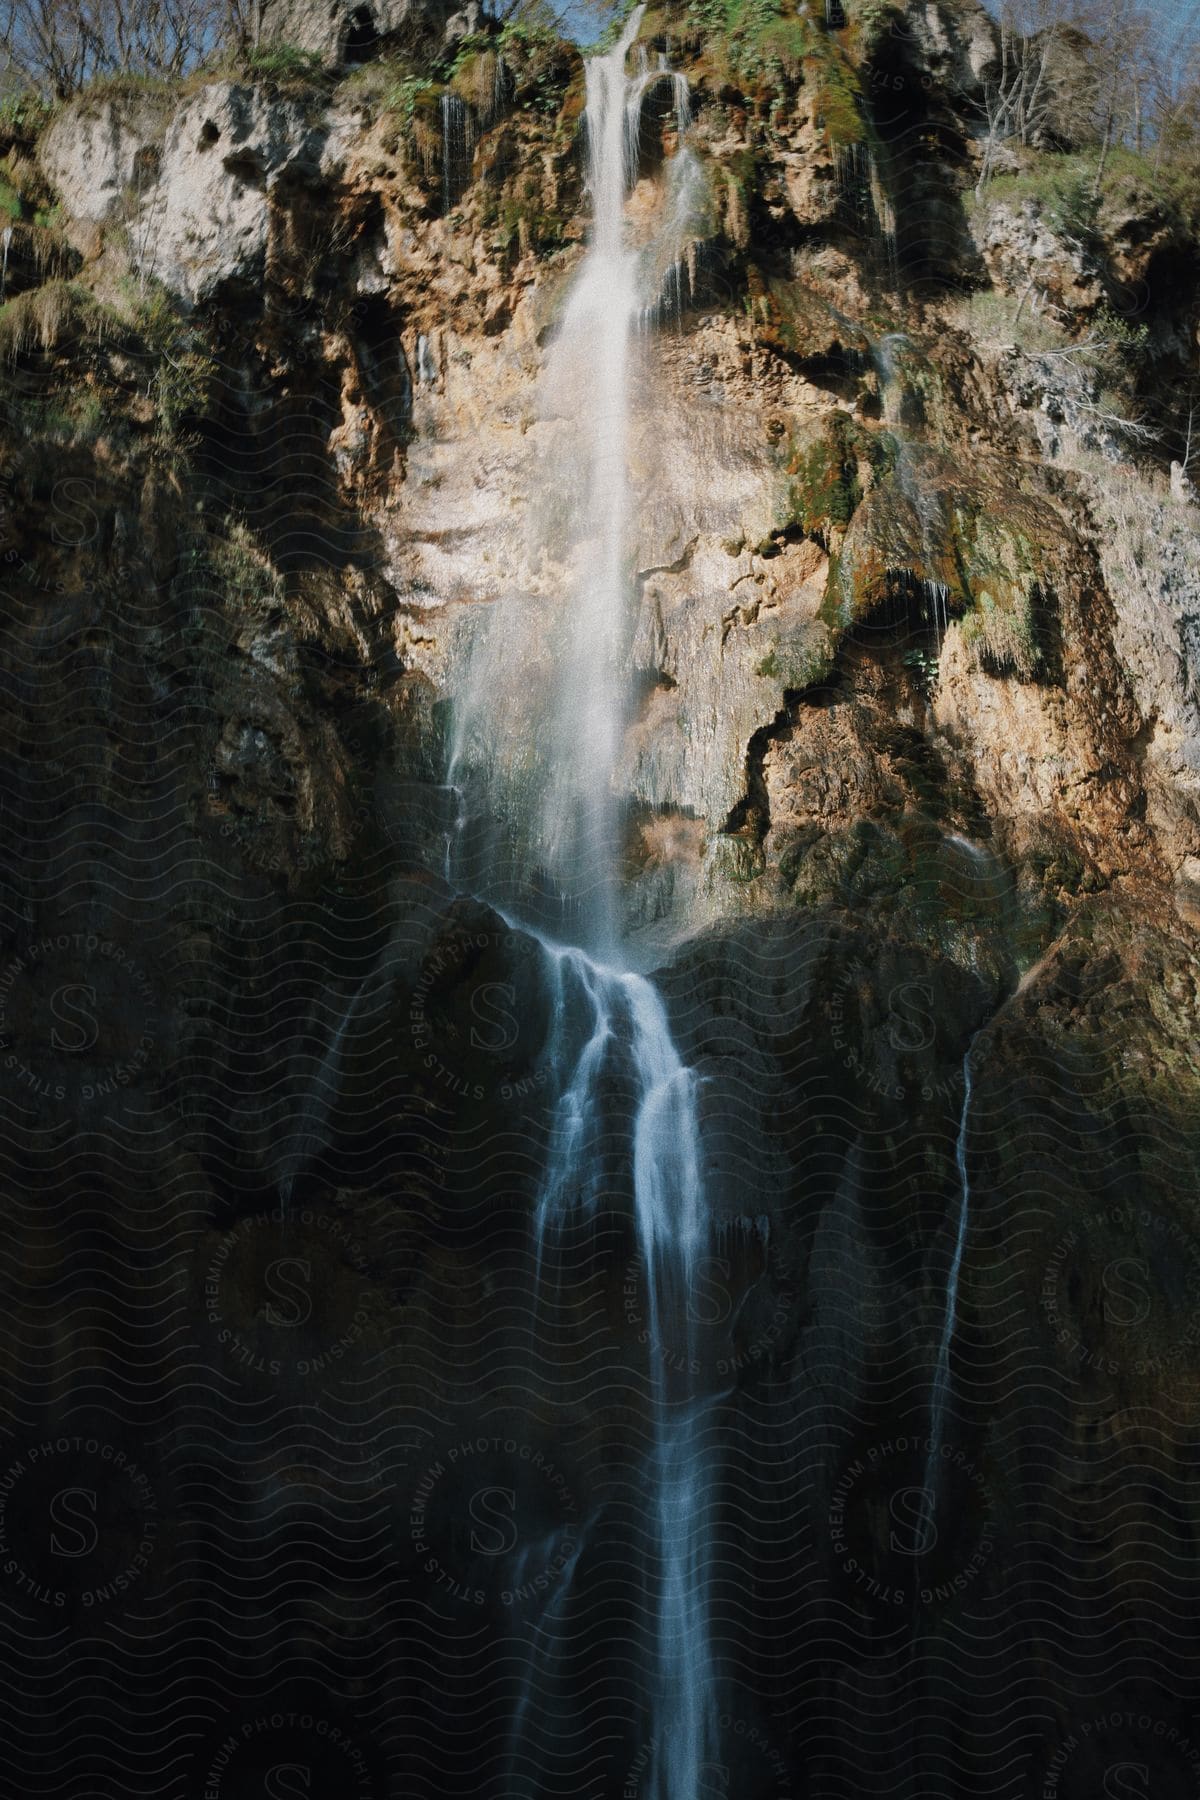 Waterfalls flow over the side of a steep cliff